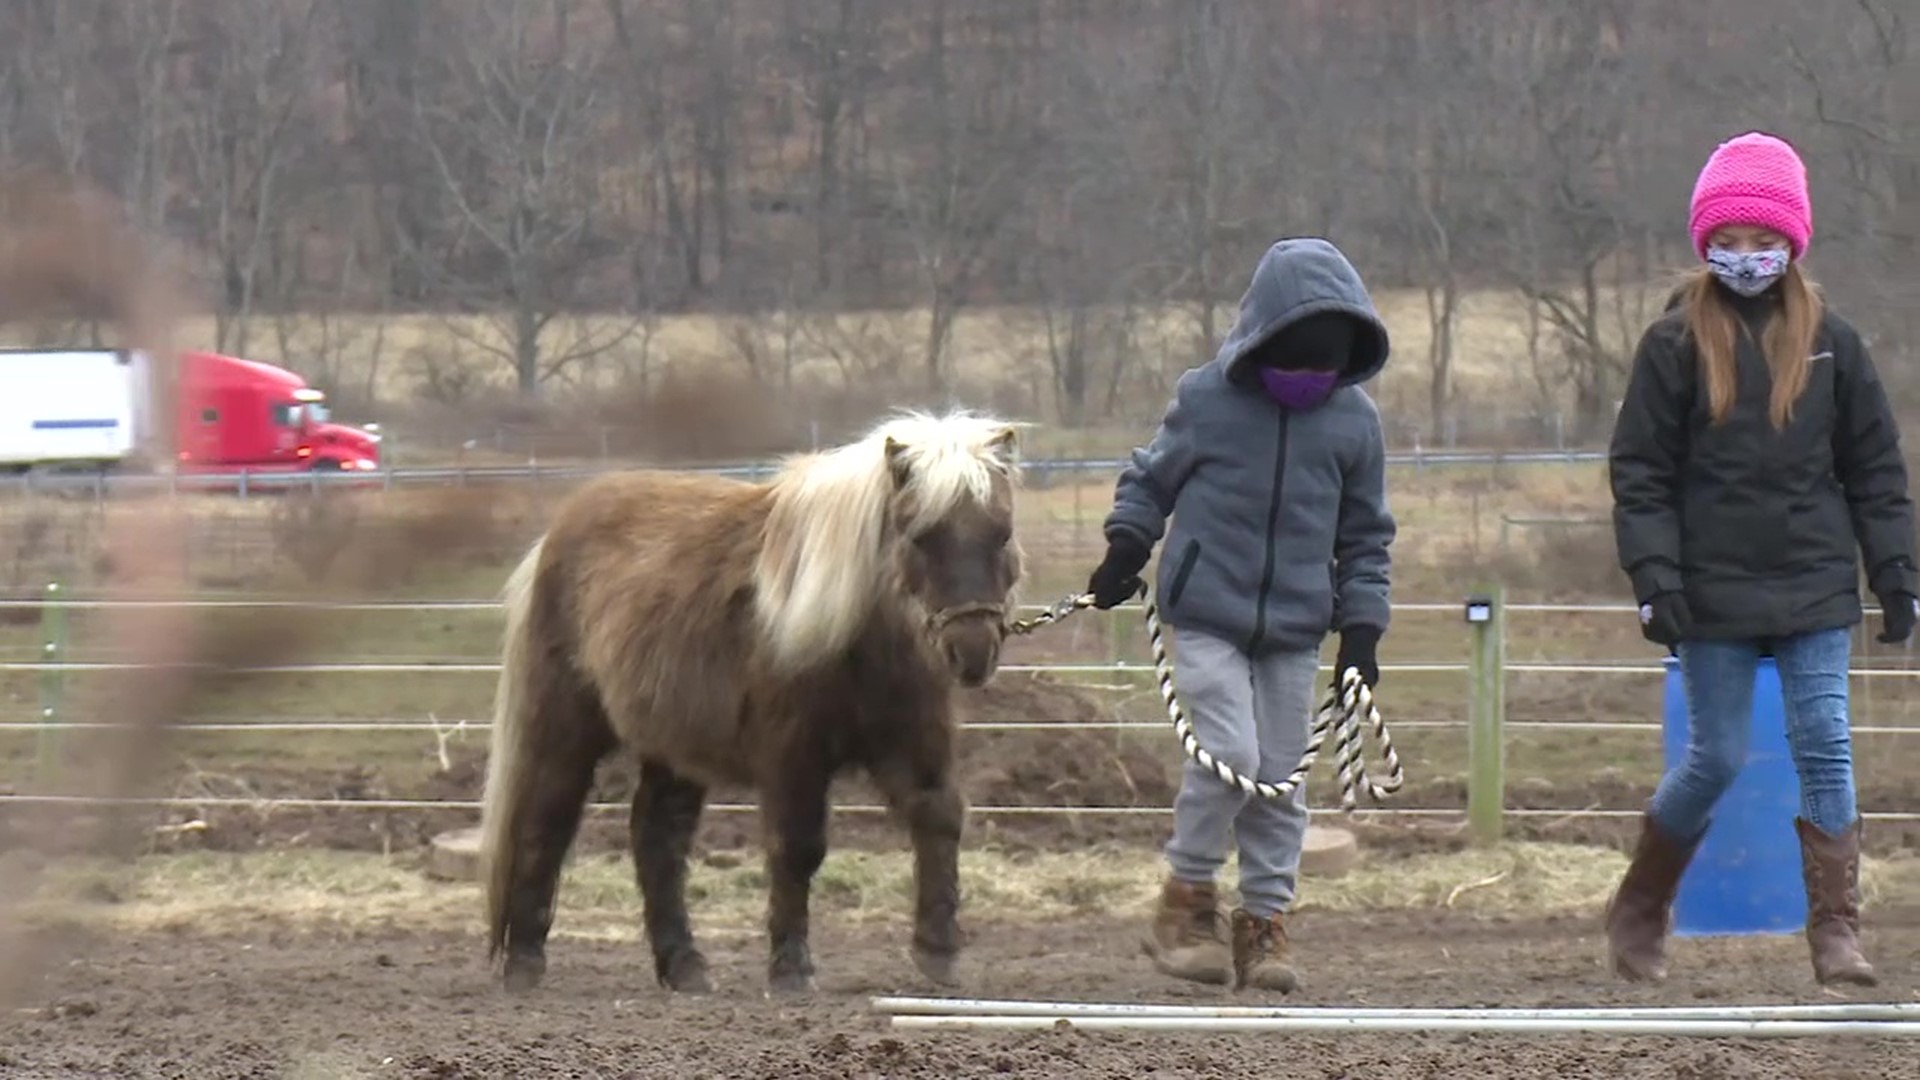 Frosty Oak Stables hosted Barn Buddies, where children learned all about grooming and handling miniature horses.